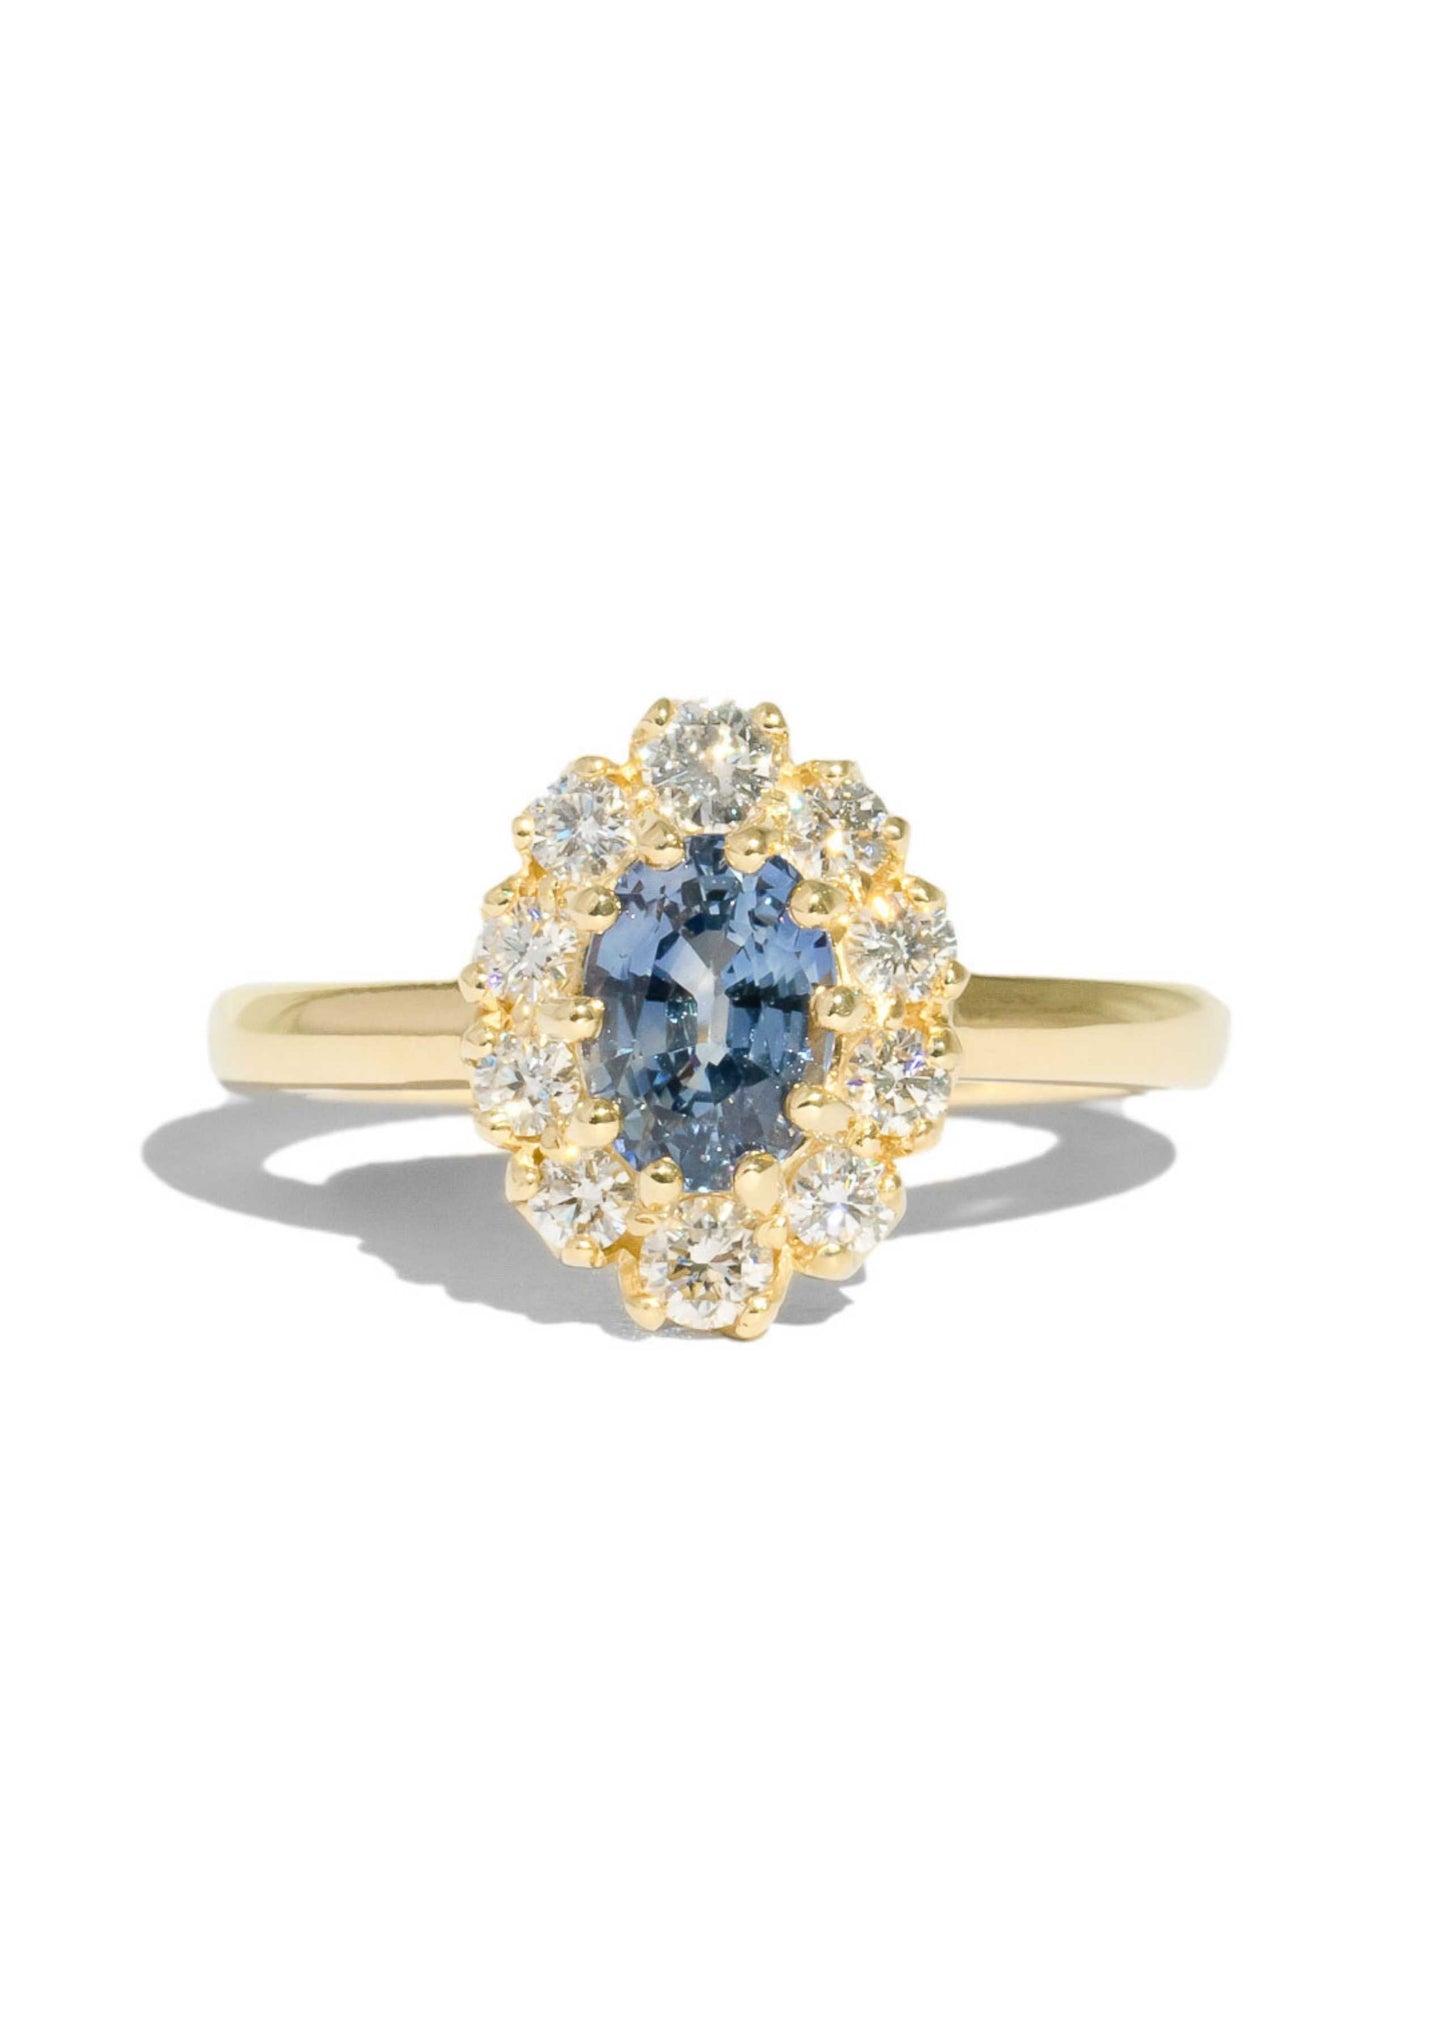 The Avery Ring with 1.2ct Ceylon Sapphire